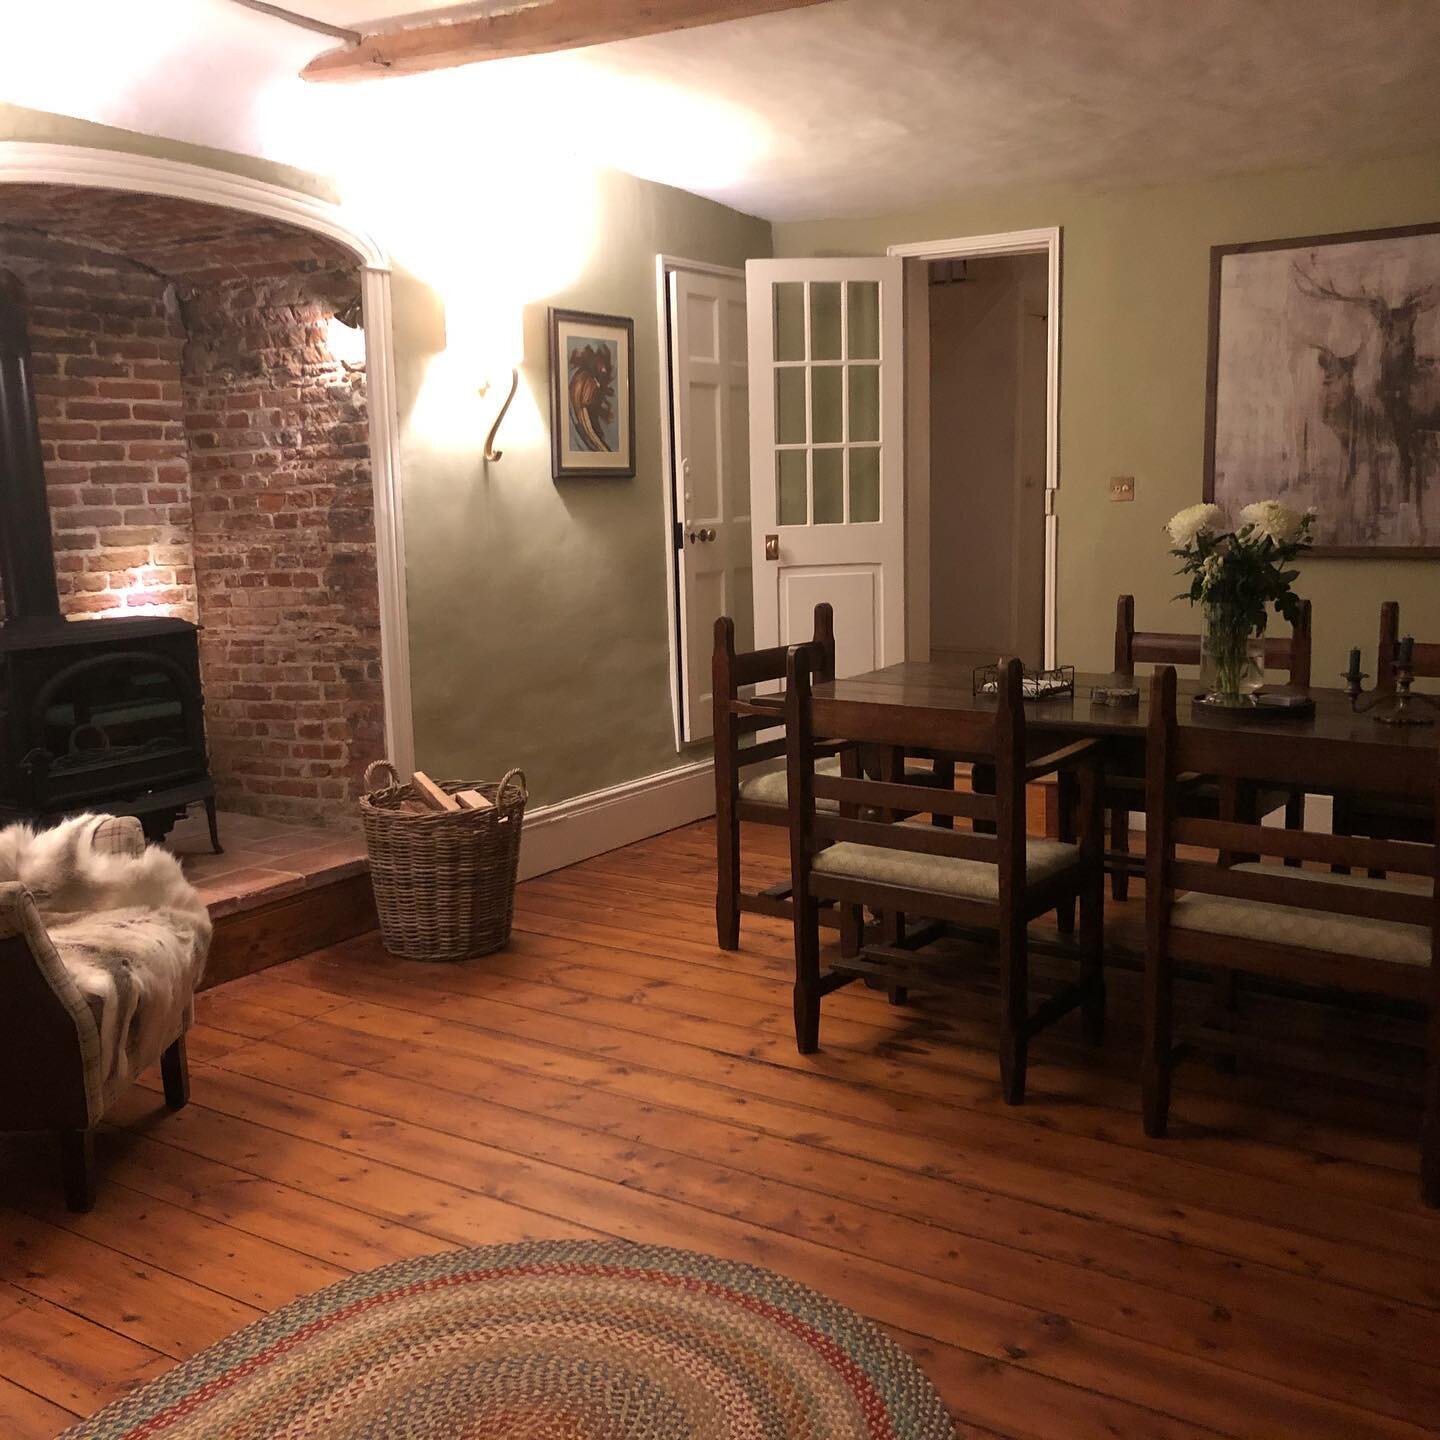 A nice after shot, of a dining room and fireplace we restored last year, the client has now created such a nice warm and homely feel to the room #restorationproject #lime #limeplastering #traditonalbrickwork  #oldfireplace #georgian #interiors #inter